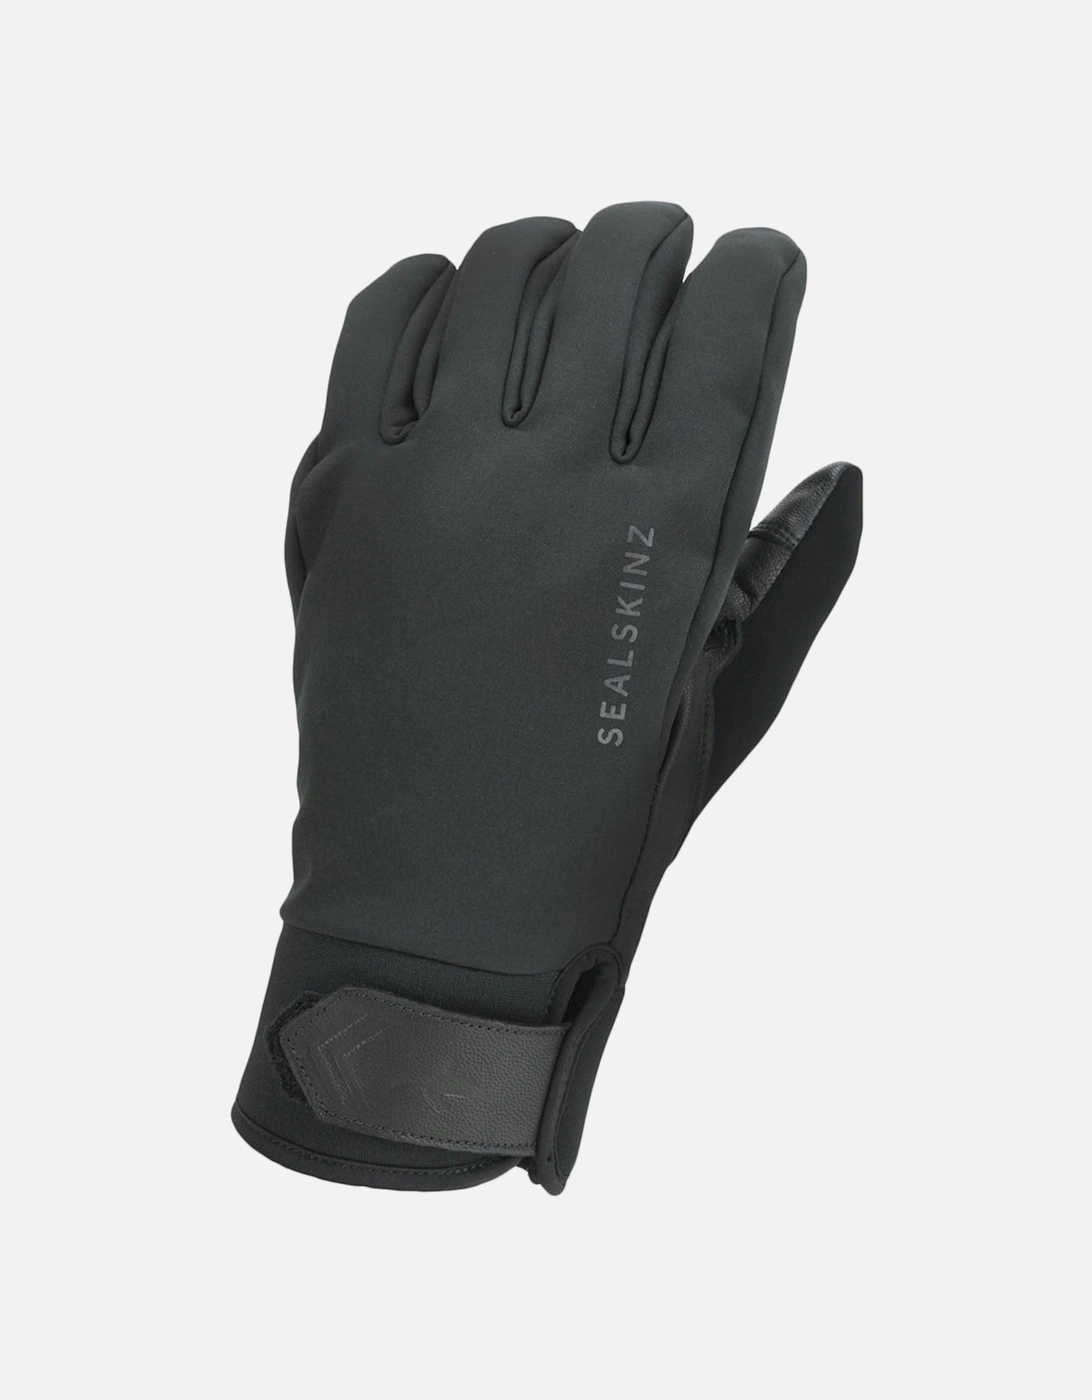 Kelling Waterproof All Weather Insulated Gloves